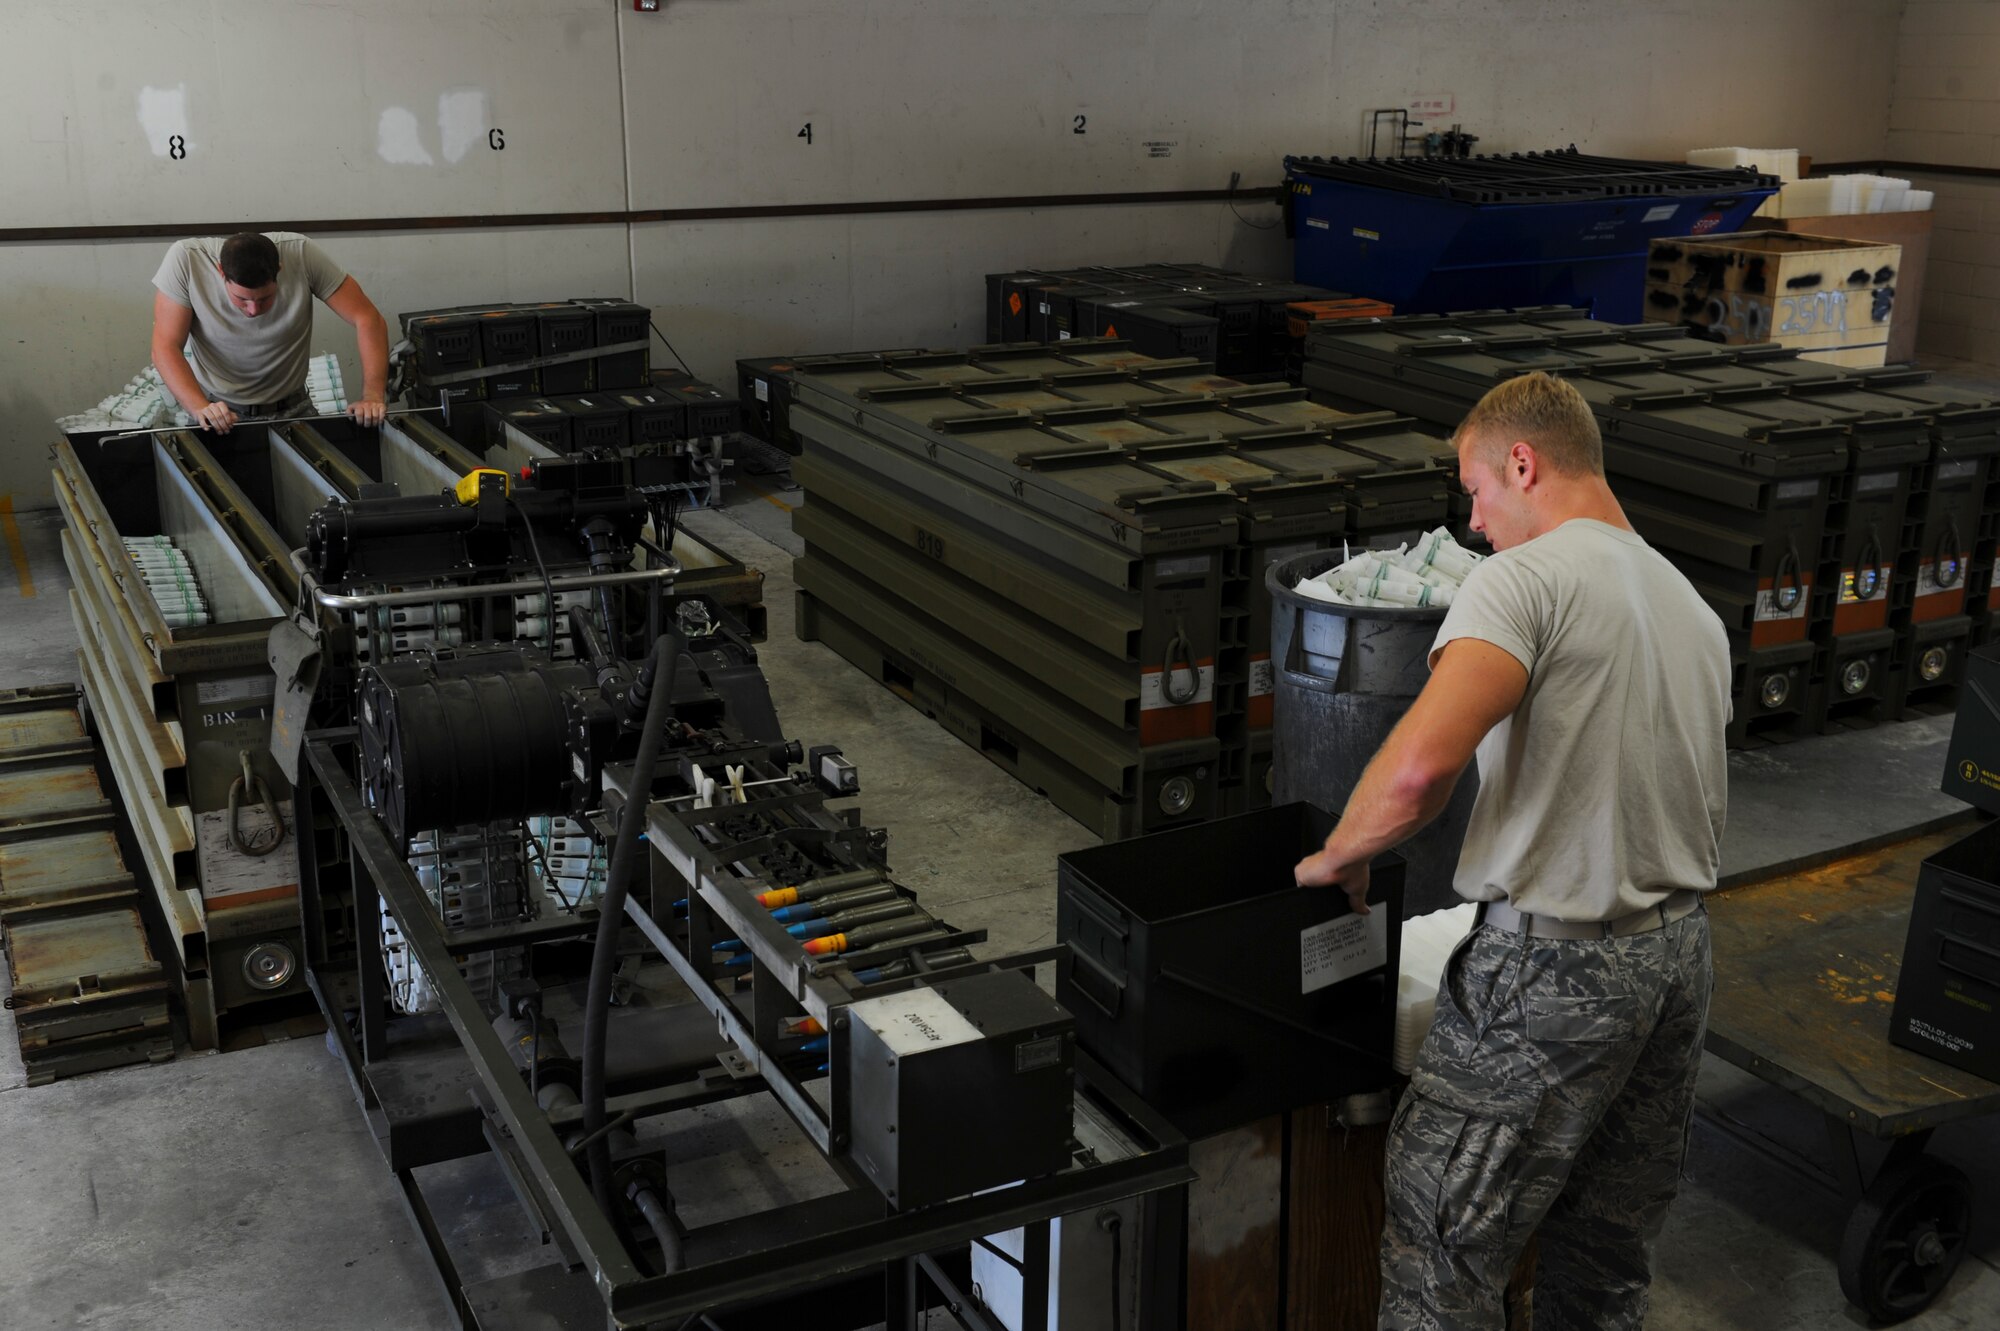 Munitions maintenance crew members unload 25mm rounds at Hurlburt Field, Fla. Nov. 6, 2013. Crew members placed live munitions, which were removed from plastic sleeves, into containers for storage. (U.S. Air Force photo/Staff Sgt. John Bainter)